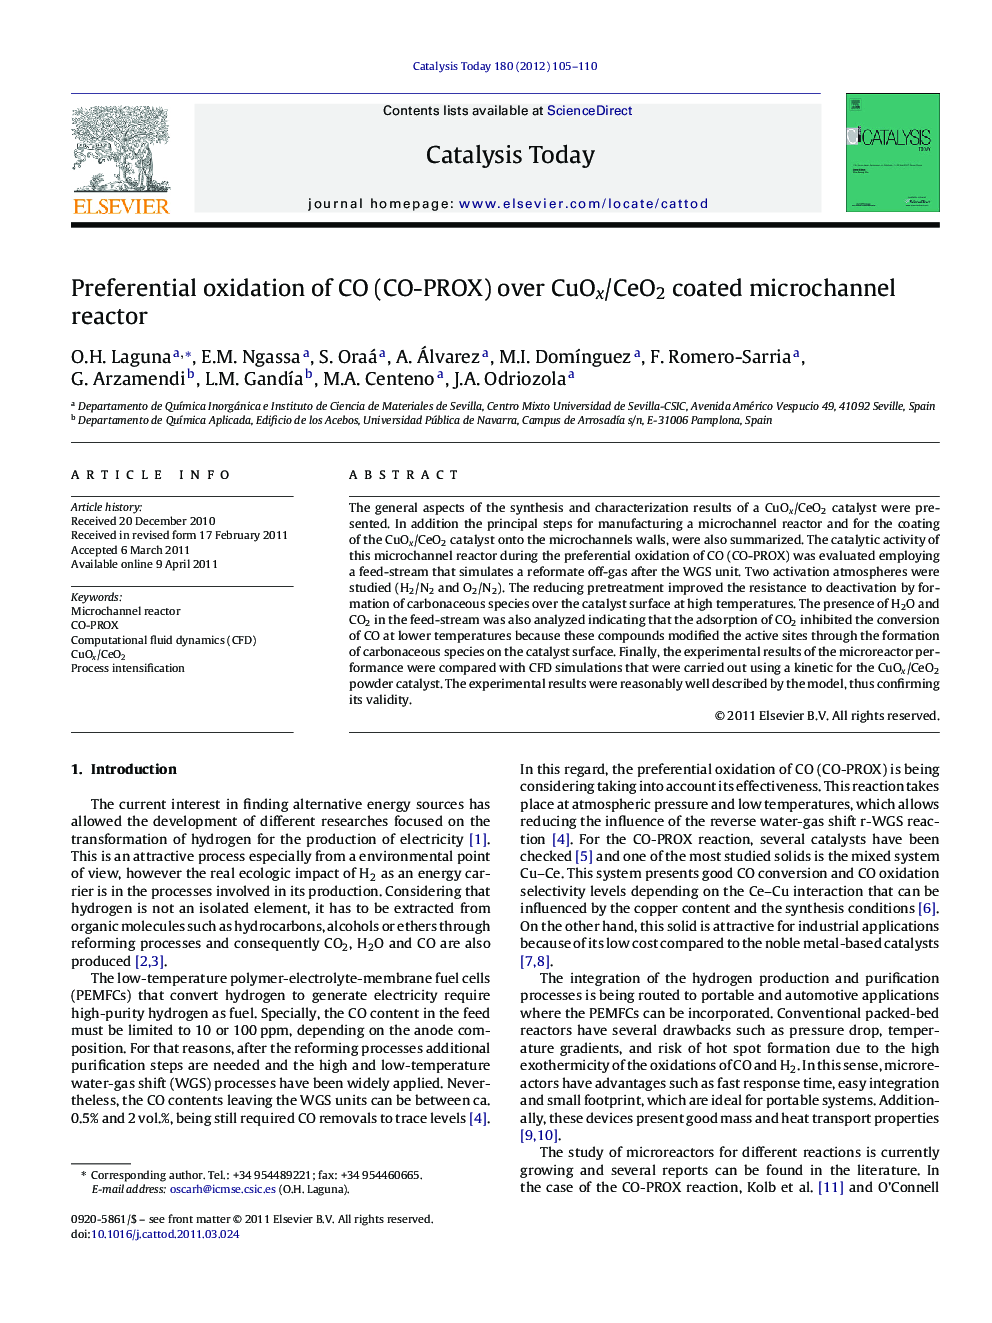 Preferential oxidation of CO (CO-PROX) over CuOx/CeO2 coated microchannel reactor